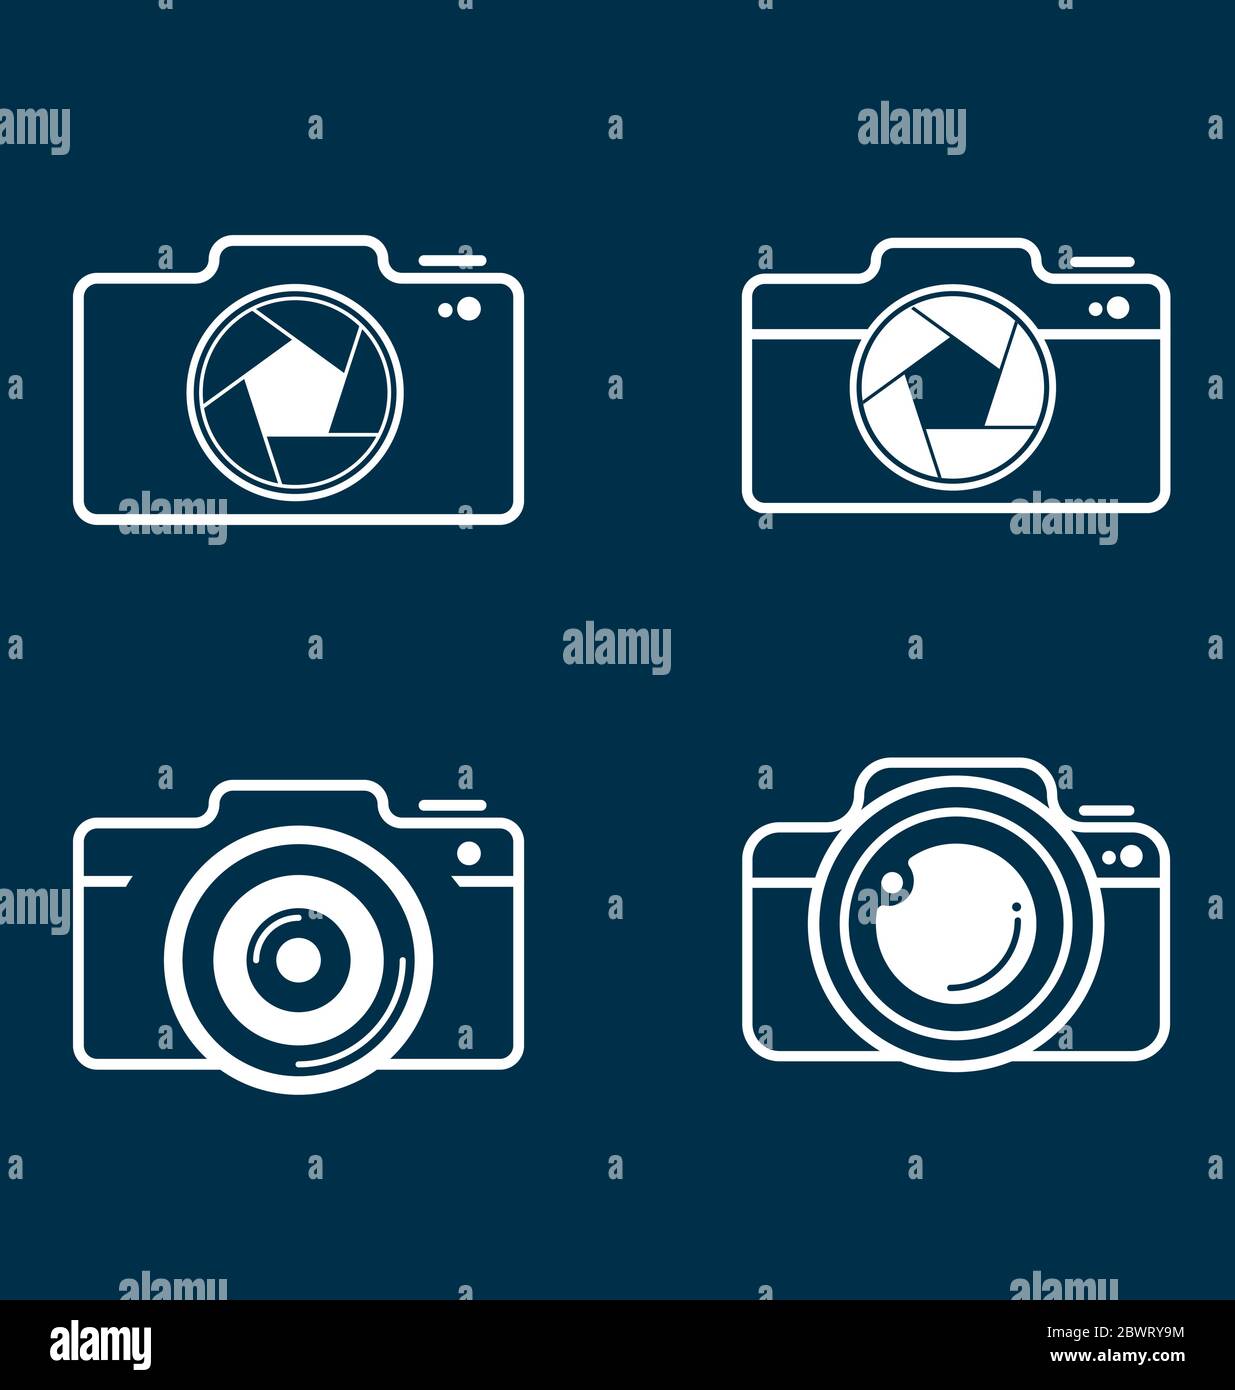 Camera icons set for photographers. Photography camera icon set vector eps Stock Vector